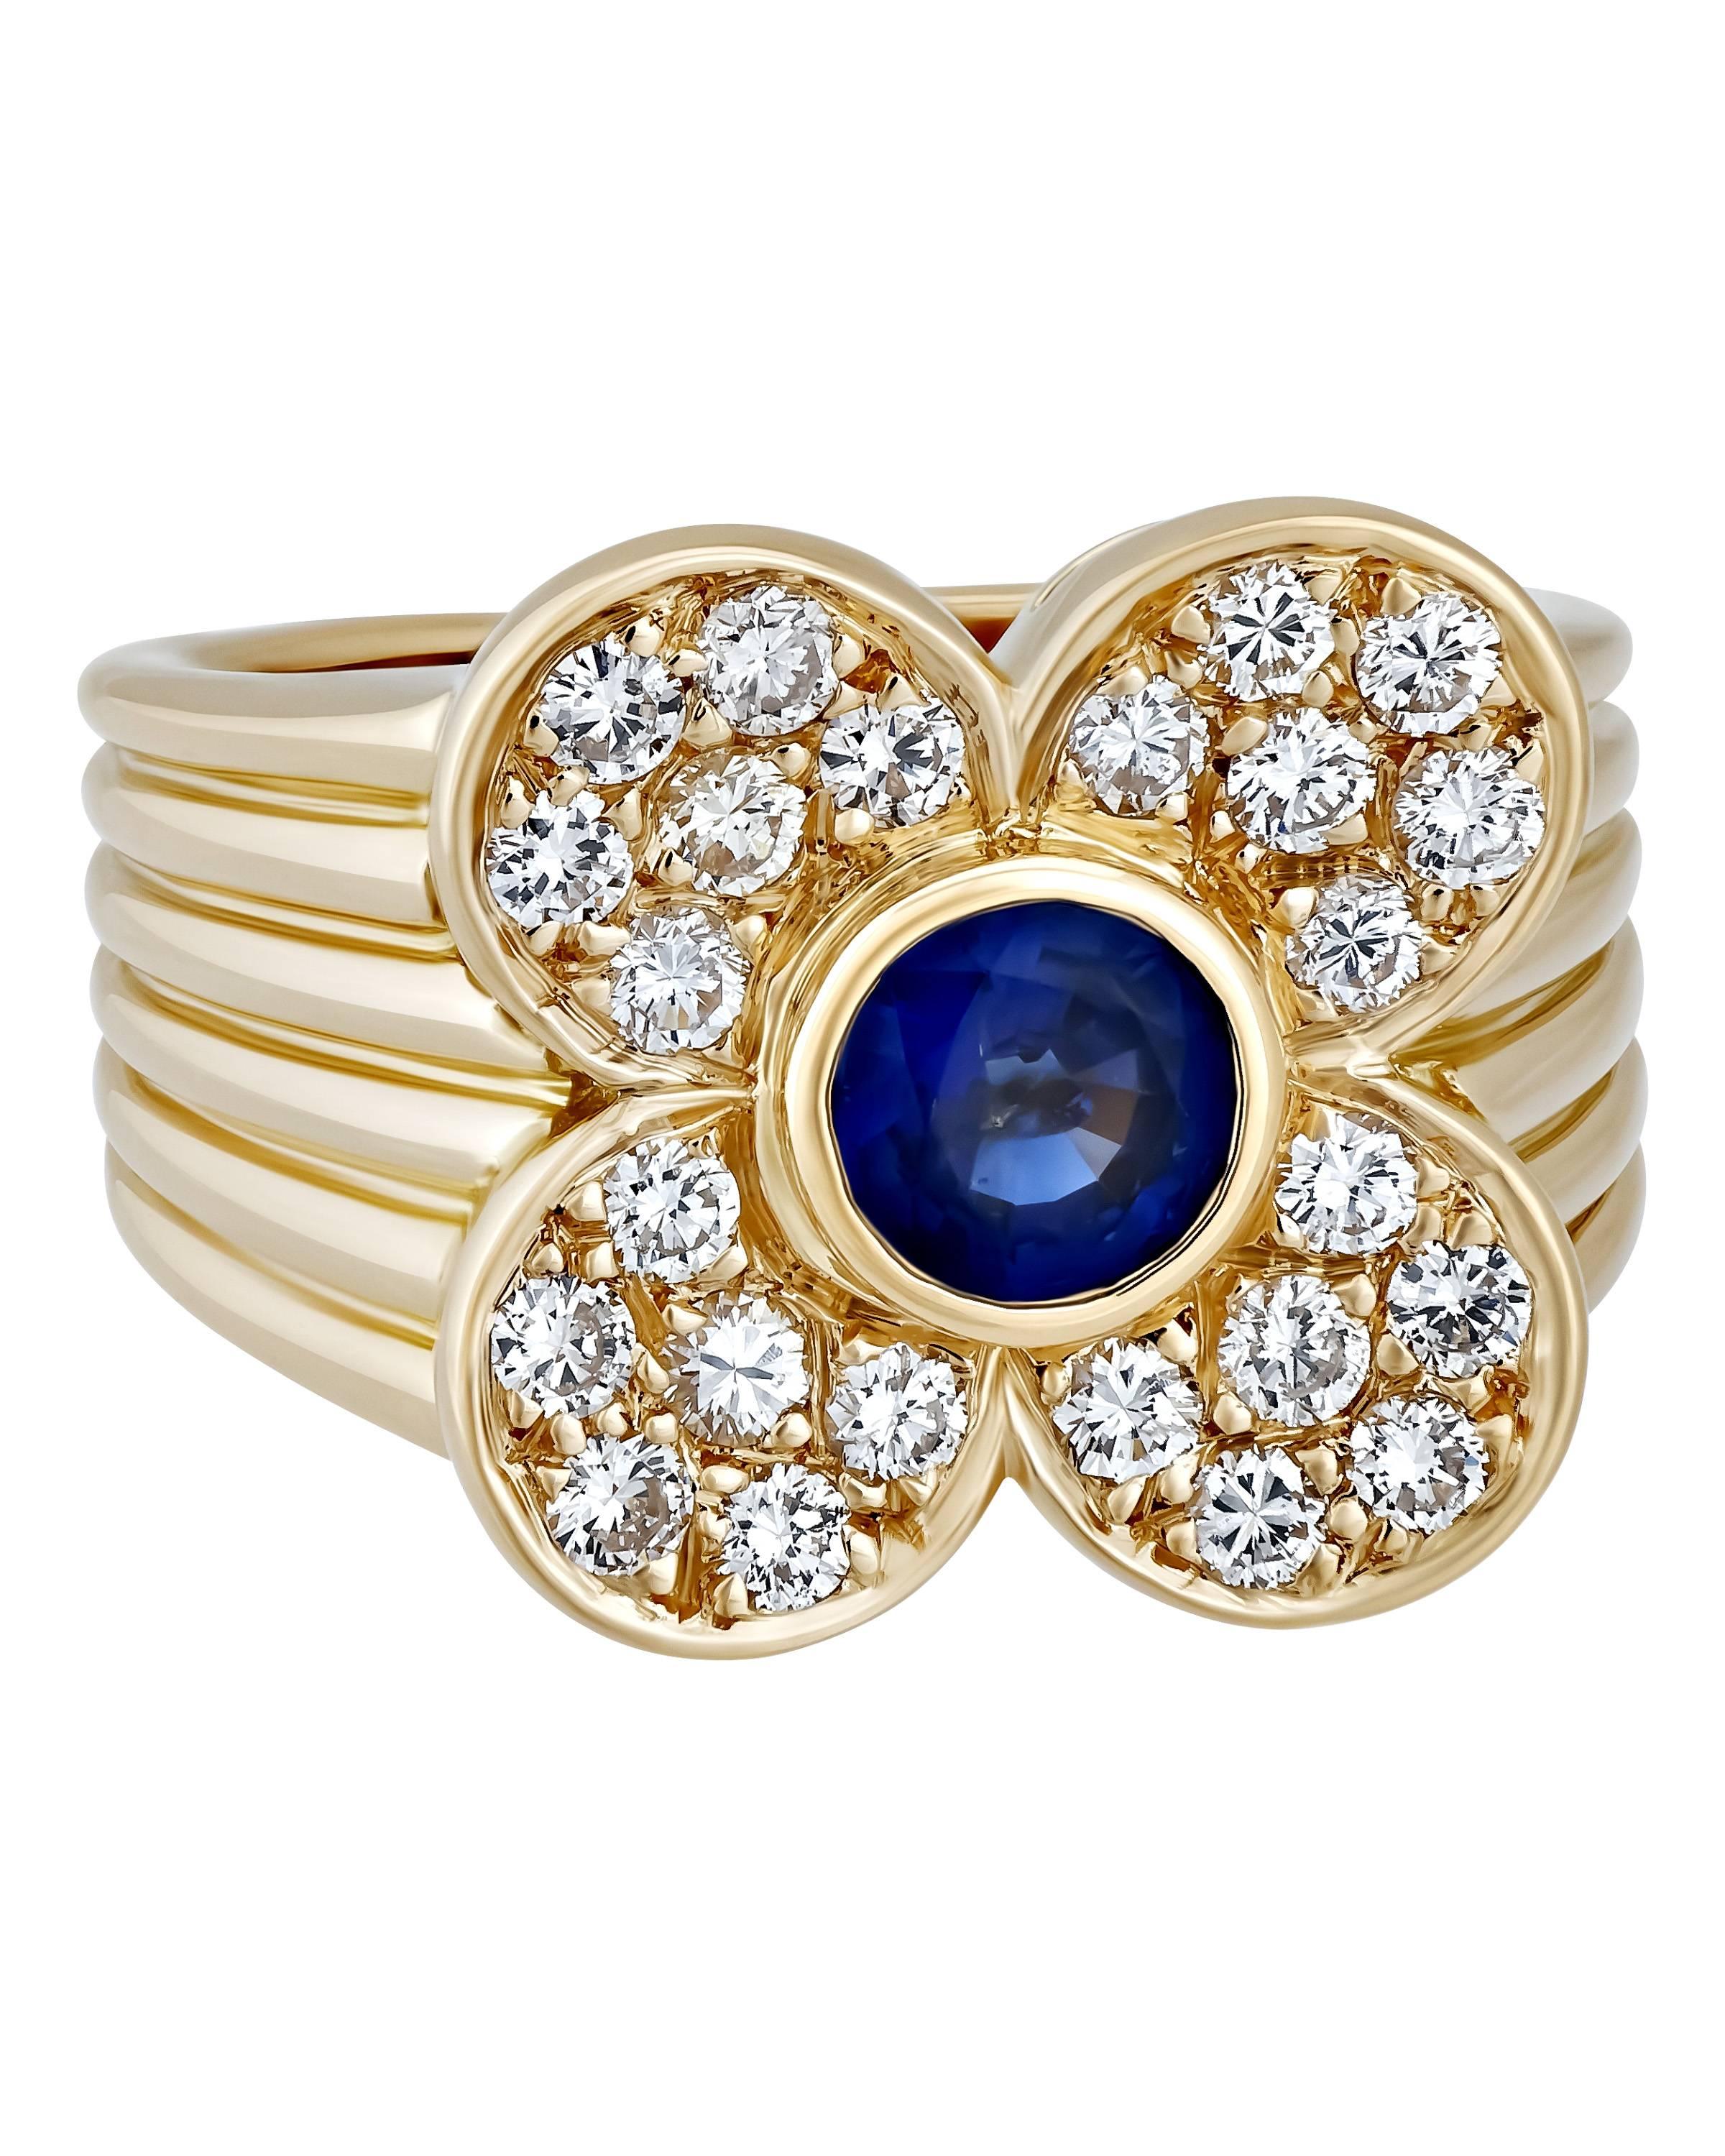 The yellow gold band on this vivid, eye-catching ring perfectly complements the diamond and sapphire. This one piece is evocative of a splendid spring or summer day.

METAL TYPE: 18K Yellow Gold
STONE WEIGHT: 0.75ct twd
TOTAL WEIGHT: 10.0g
RING